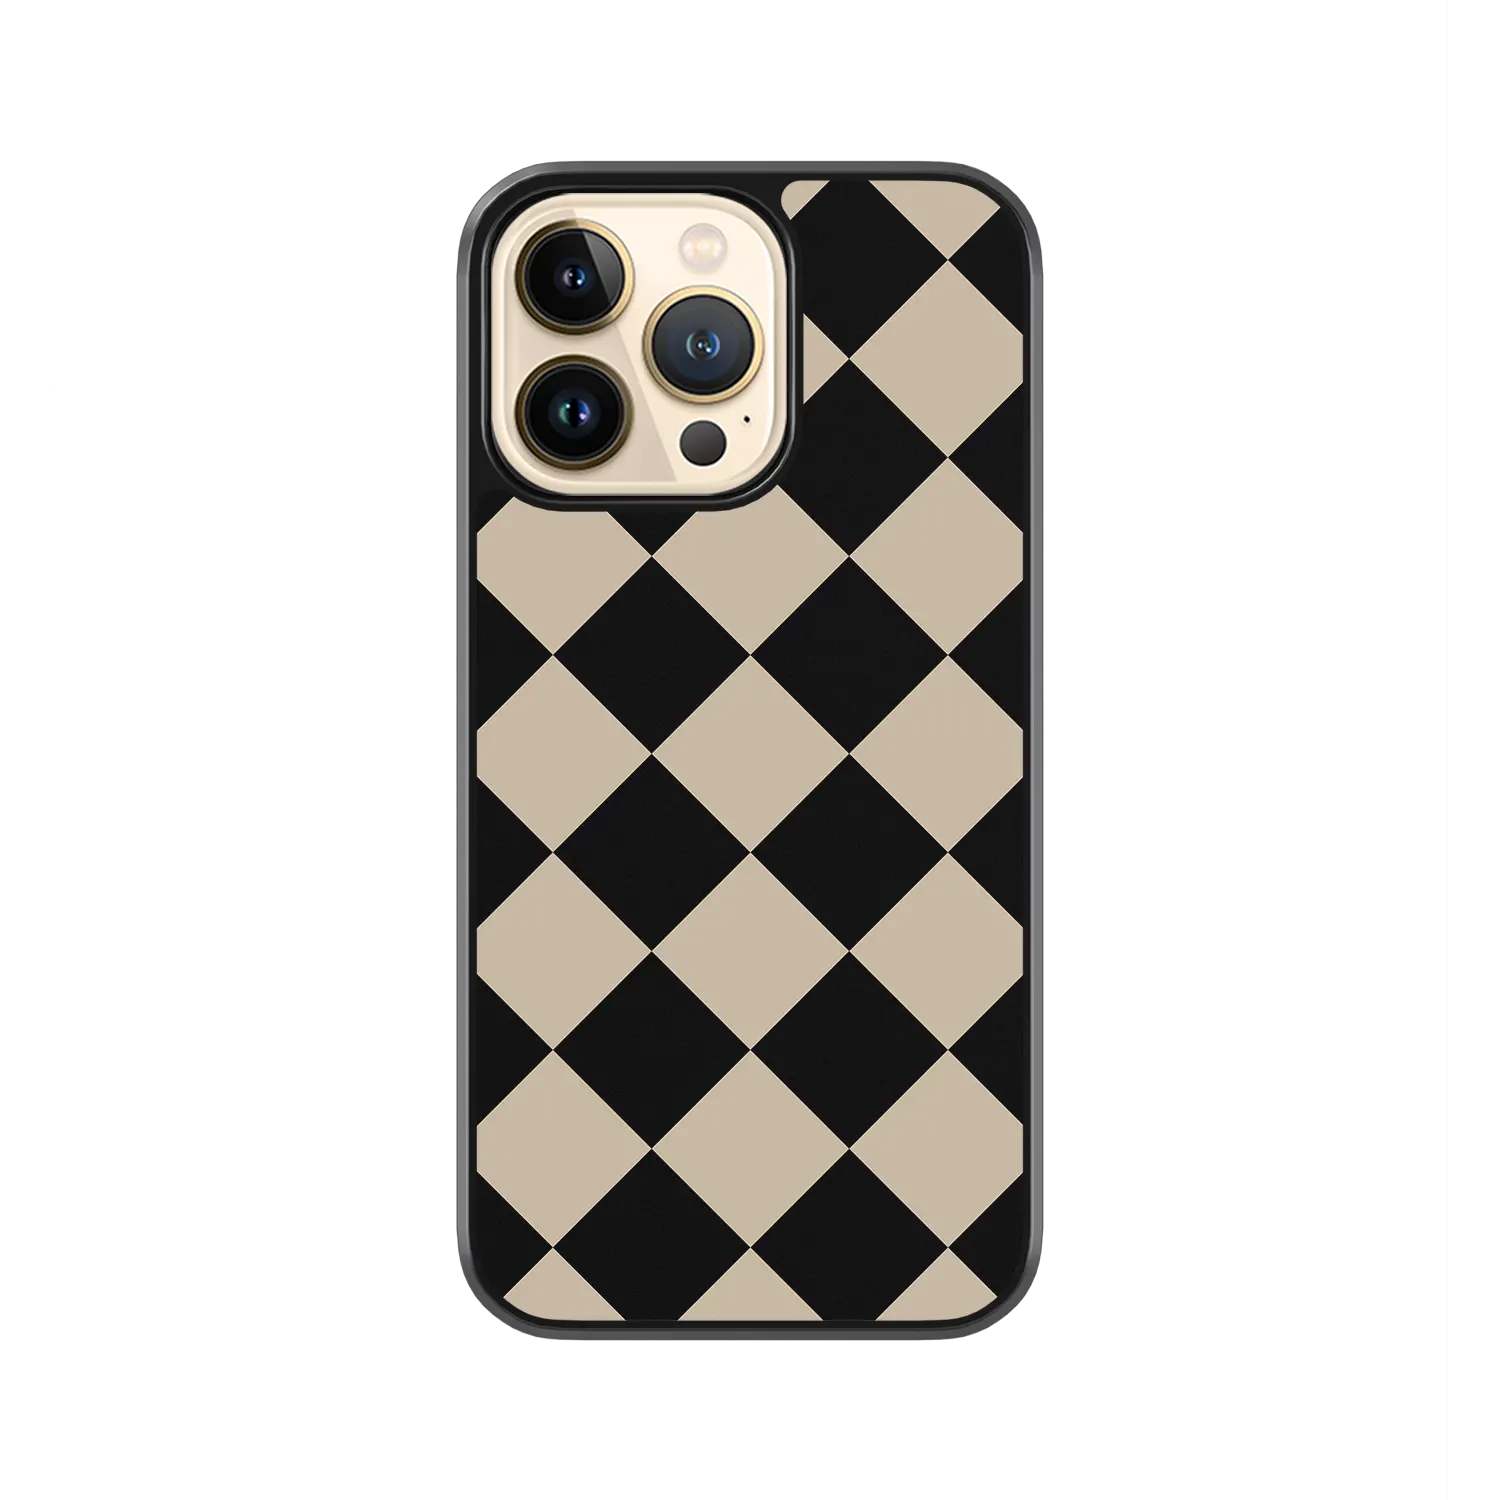 Chess iphone 12 pro max case